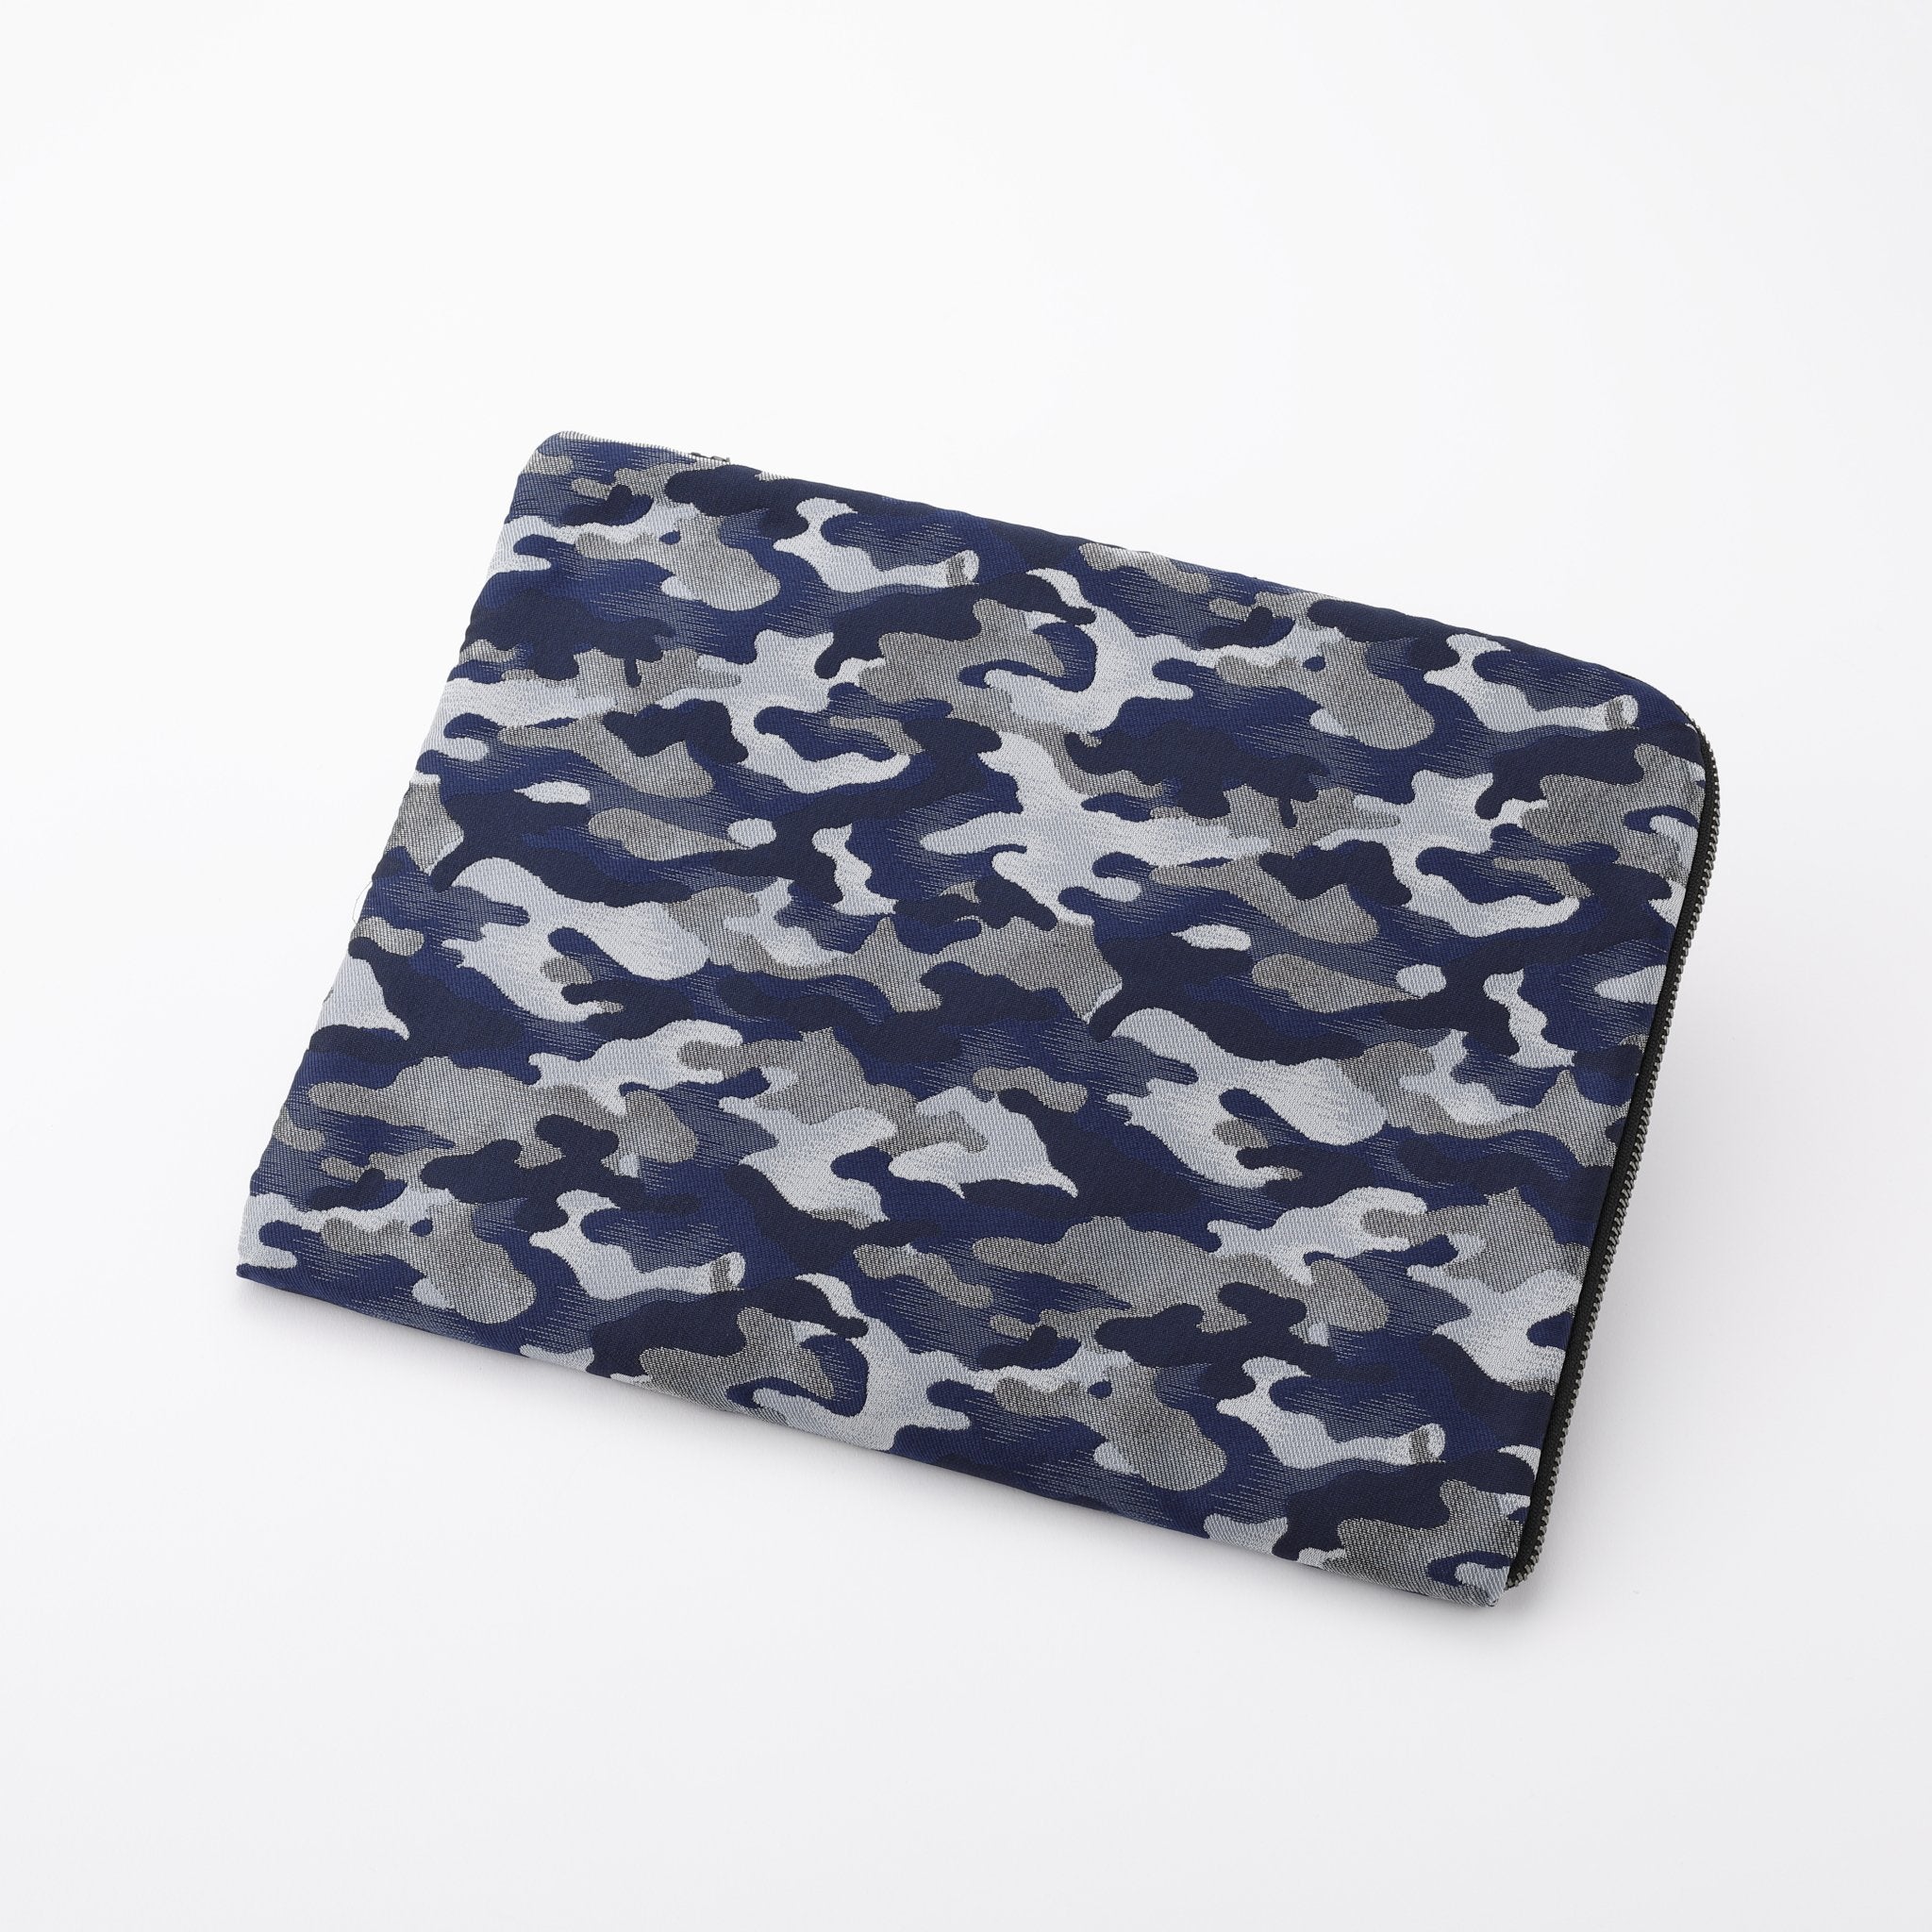 Made in Japan Camoflage Laptop Sleeve